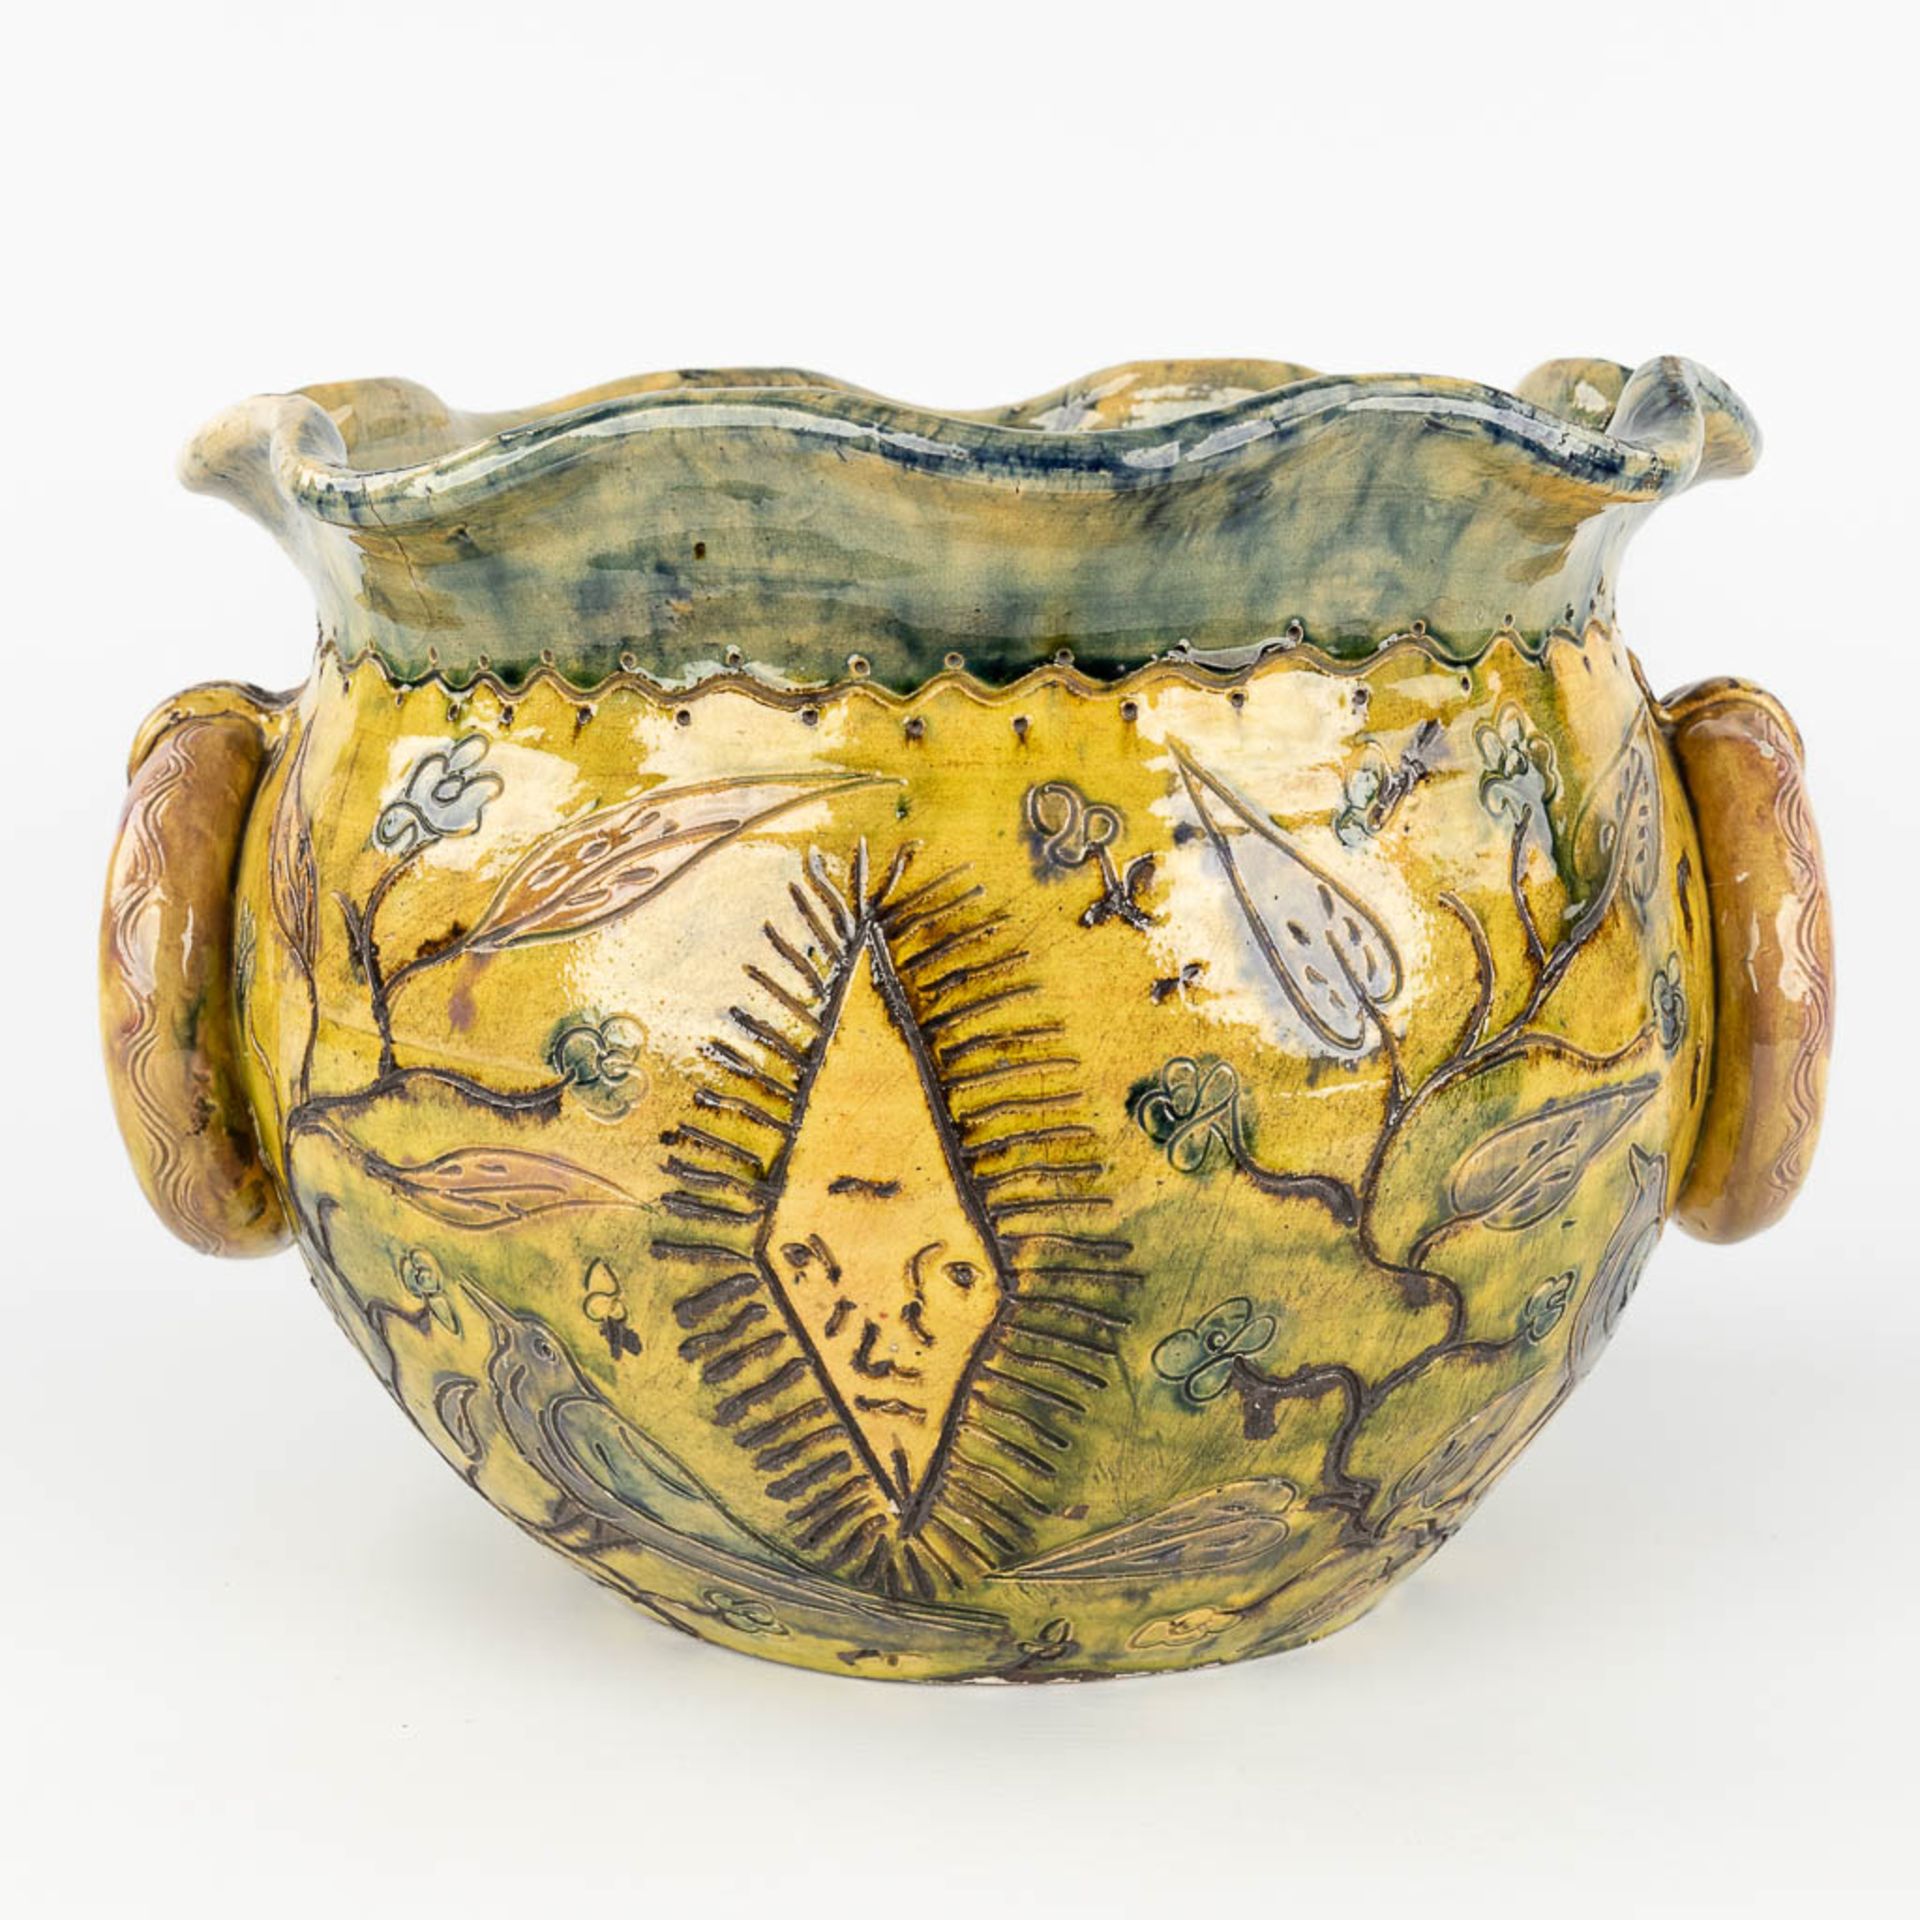 A Cache pot made of Flemish Earthenware, Bredene. 19th century. (L: 36,5 x W: 40 x H: 28 cm) - Image 5 of 12